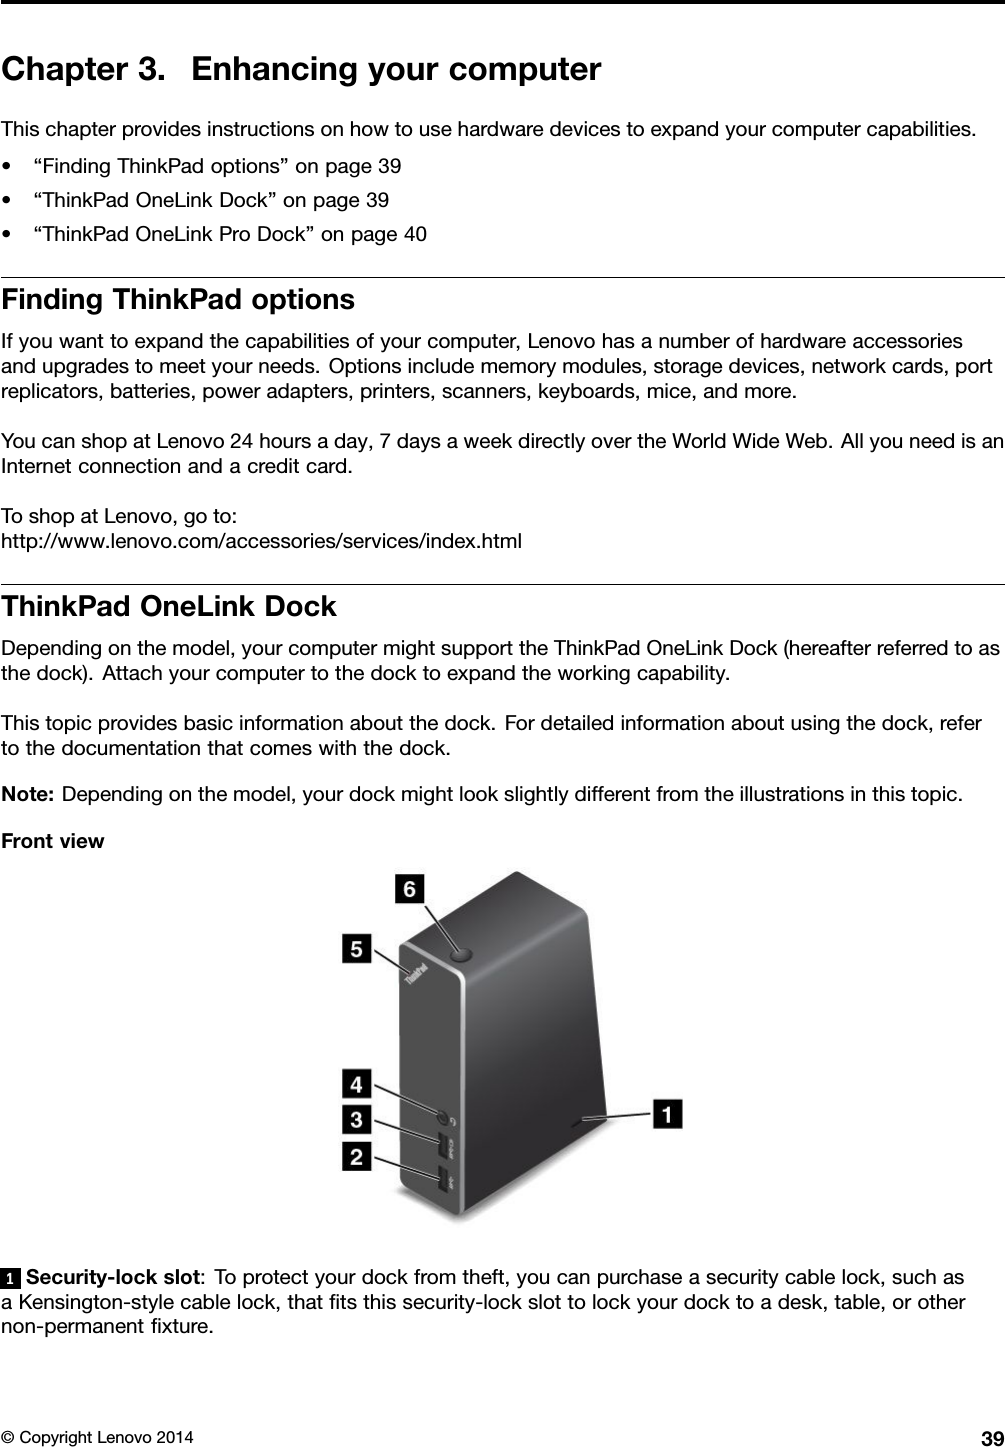 Chapter 3. Enhancing your computerThis chapter provides instructions on how to use hardware devices to expand your computer capabilities.• “Finding ThinkPad options” on page 39• “ThinkPad OneLink Dock” on page 39• “ThinkPad OneLink Pro Dock” on page 40Finding ThinkPad optionsIf you want to expand the capabilities of your computer, Lenovo has a number of hardware accessoriesand upgrades to meet your needs. Options include memory modules, storage devices, network cards, portreplicators, batteries, power adapters, printers, scanners, keyboards, mice, and more.You can shop at Lenovo 24 hours a day, 7 days a week directly over the World Wide Web. All you need is anInternet connection and a credit card.To shop at Lenovo, go to:http://www.lenovo.com/accessories/services/index.htmlThinkPad OneLink DockDepending on the model, your computer might support the ThinkPad OneLink Dock (hereafter referred to asthe dock). Attach your computer to the dock to expand the working capability.This topic provides basic information about the dock. For detailed information about using the dock, referto the documentation that comes with the dock.Note: Depending on the model, your dock might look slightly different from the illustrations in this topic.Front view1Security-lock slot: To protect your dock from theft, you can purchase a security cable lock, such asa Kensington-style cable lock, that ﬁts this security-lock slot to lock your dock to a desk, table, or othernon-permanent ﬁxture.© Copyright Lenovo 2014 39